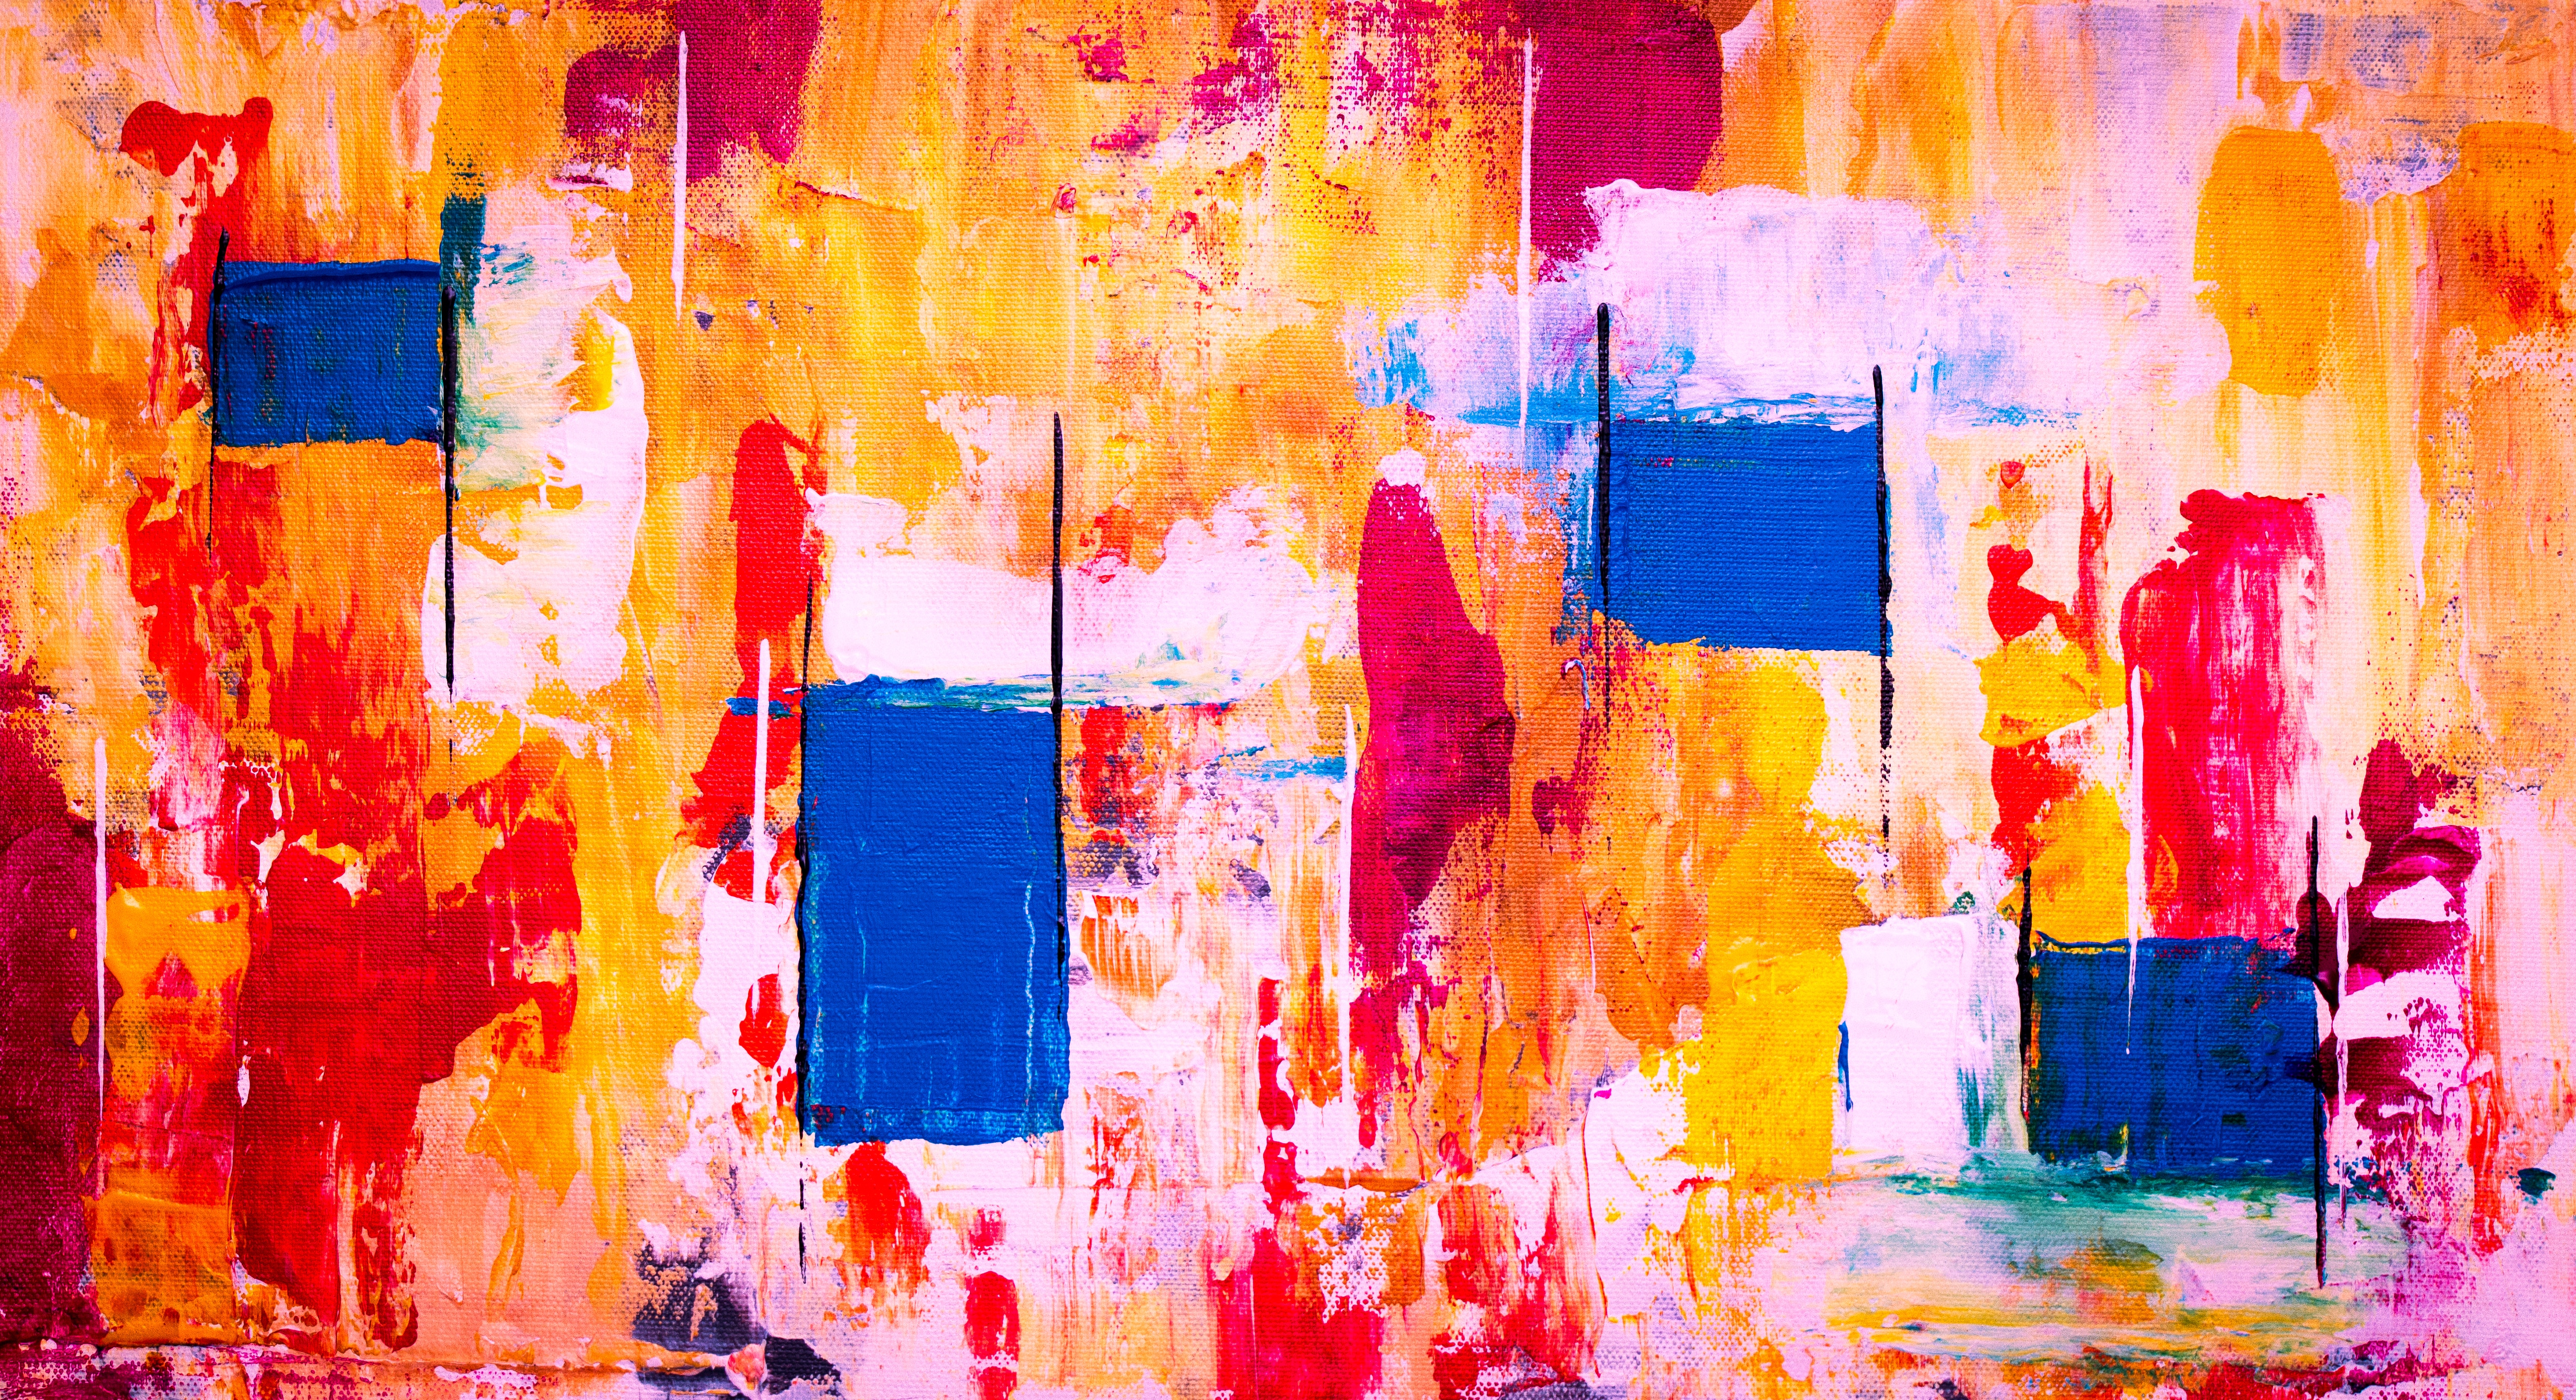 multicolored, modern, abstract, motley, paint, up to date, canvas